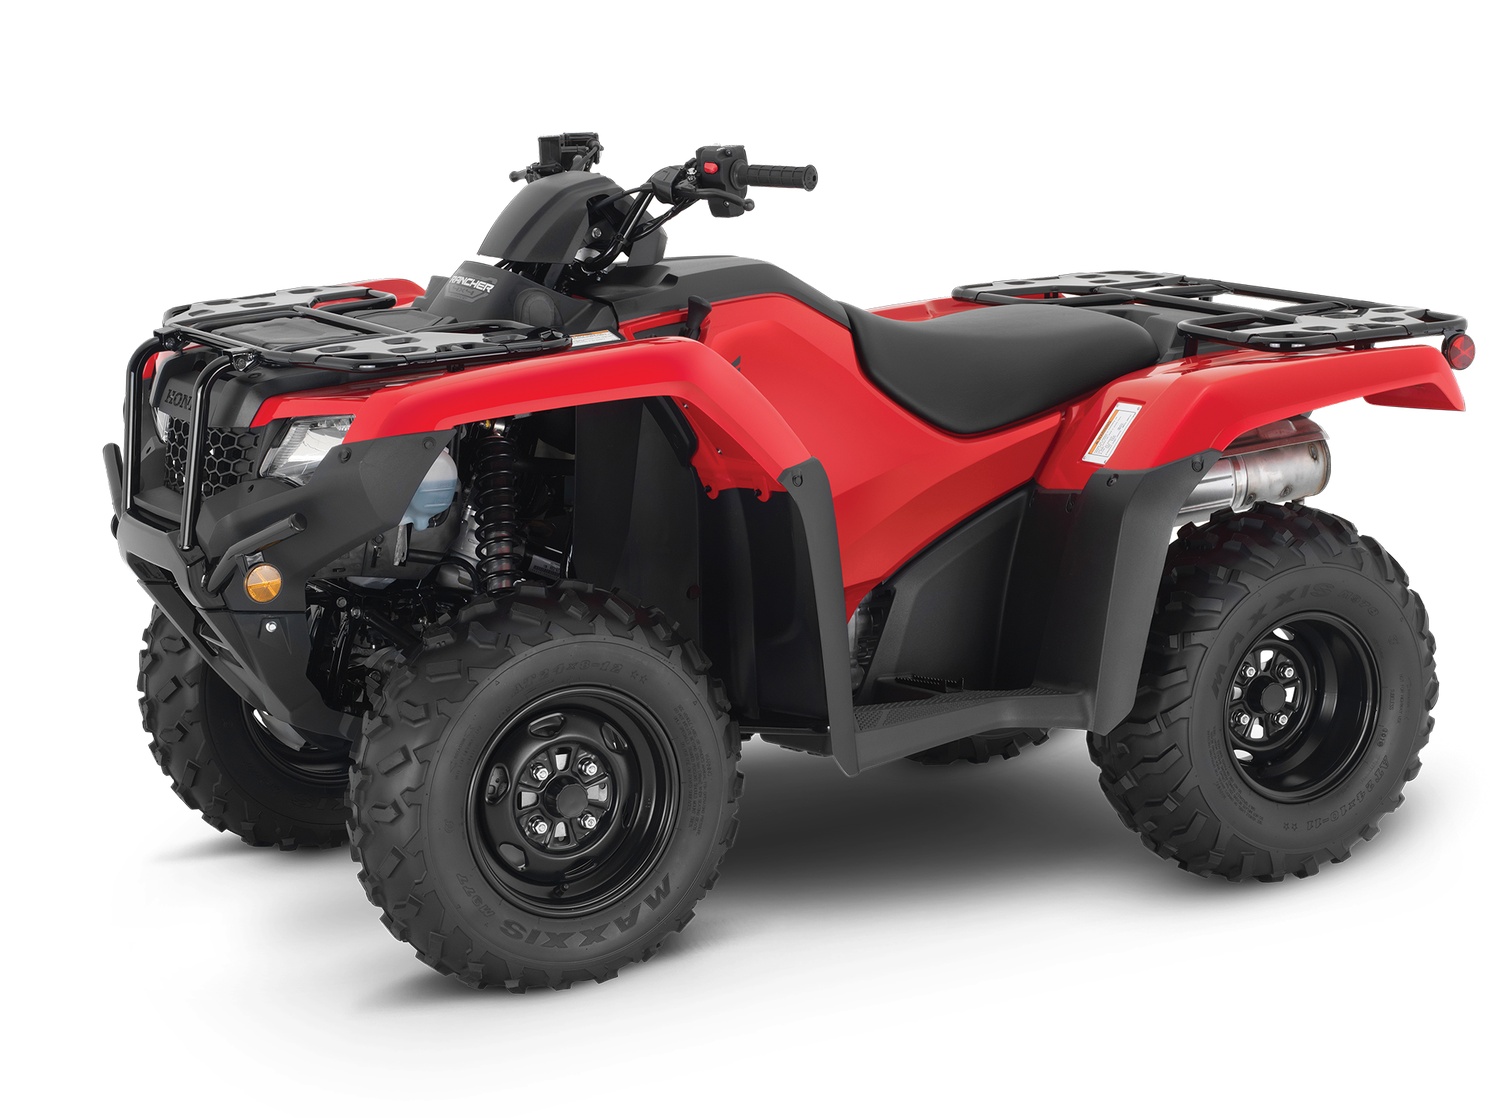 2023 Honda TRX420 RANCHER - Available Now!! **Limited Quantities**